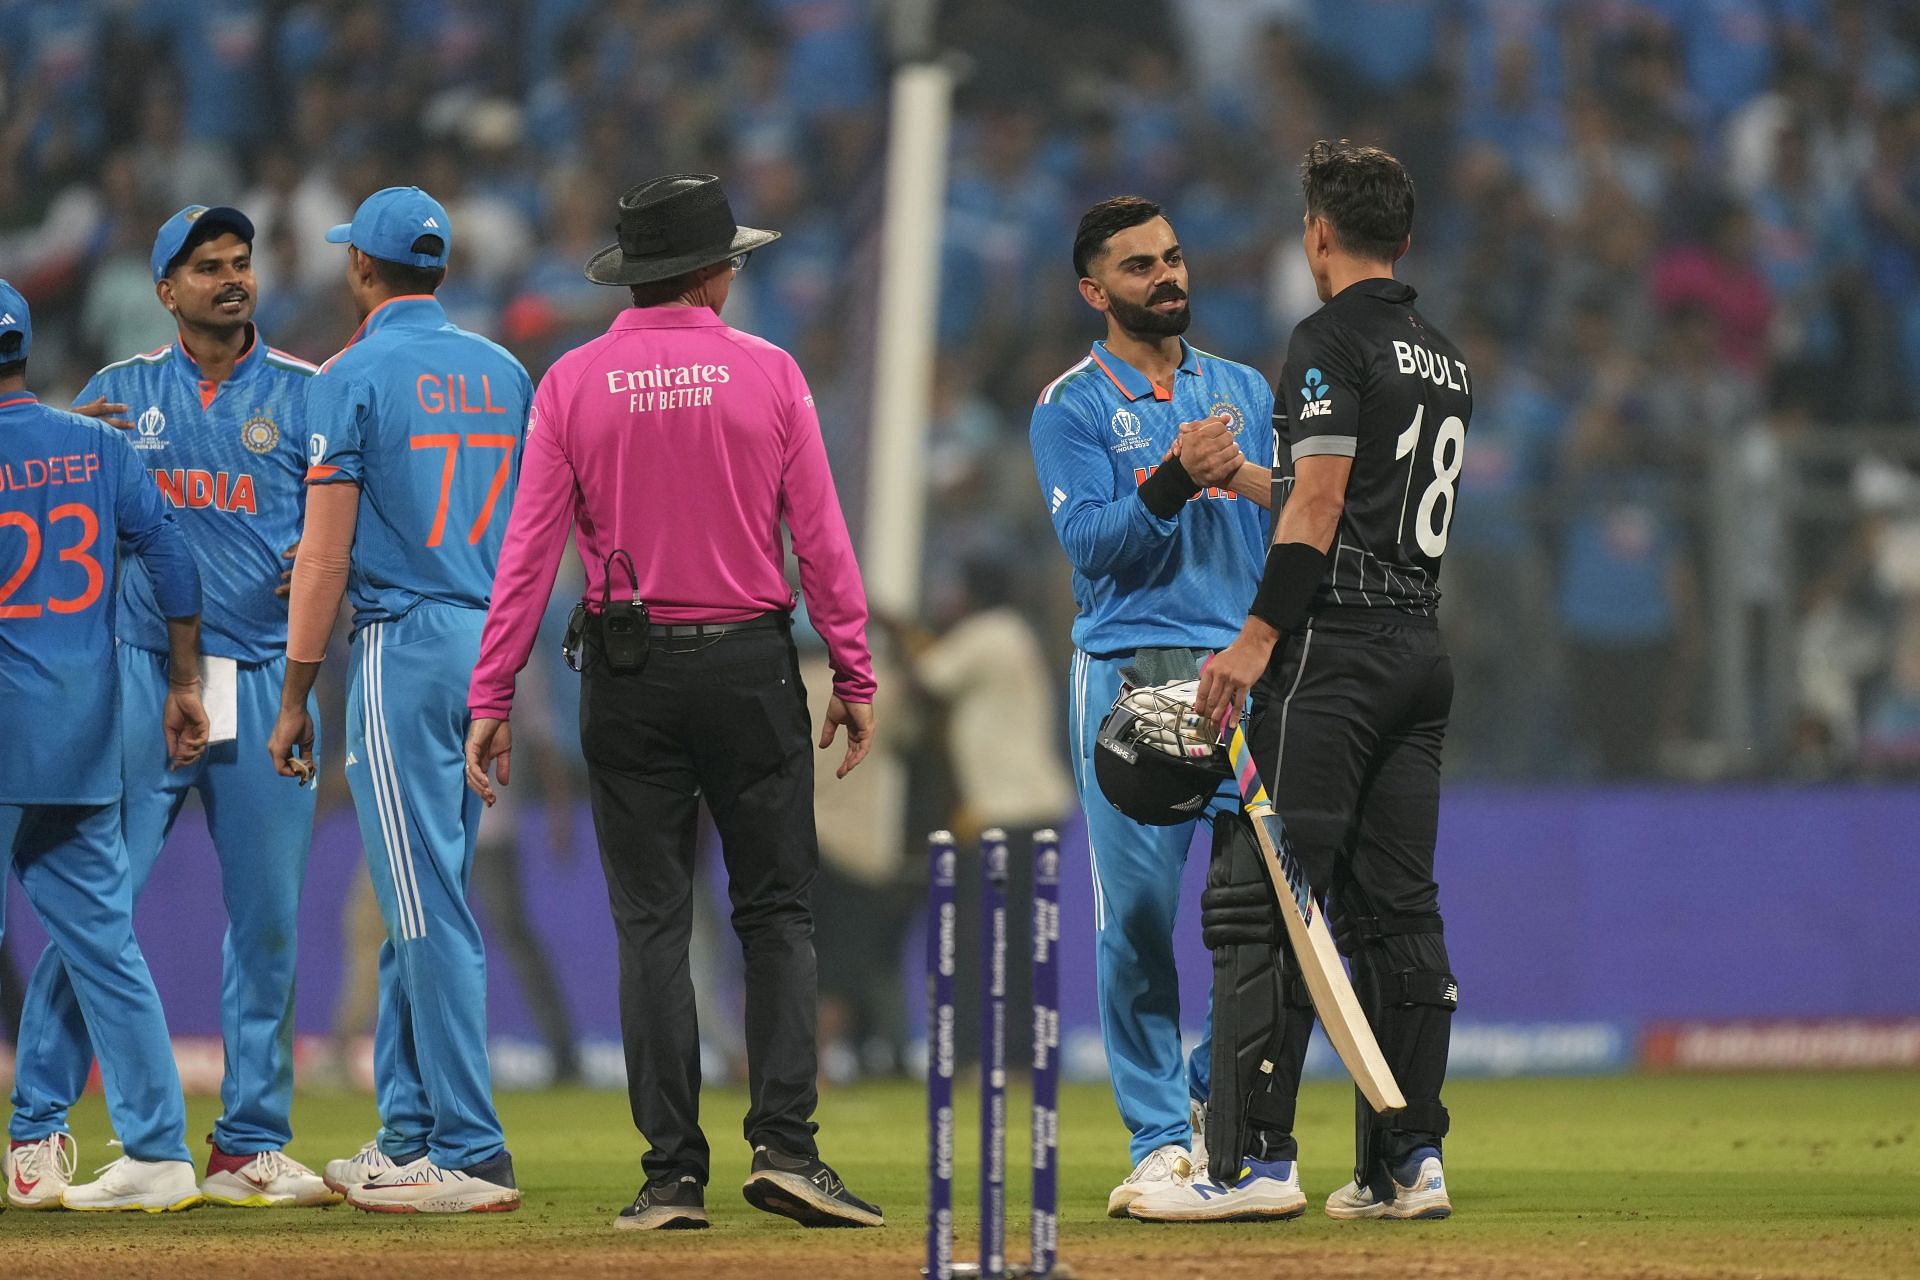 India registered a convincing 70-run win against New Zealand in the semifinal. [P/C: AP]